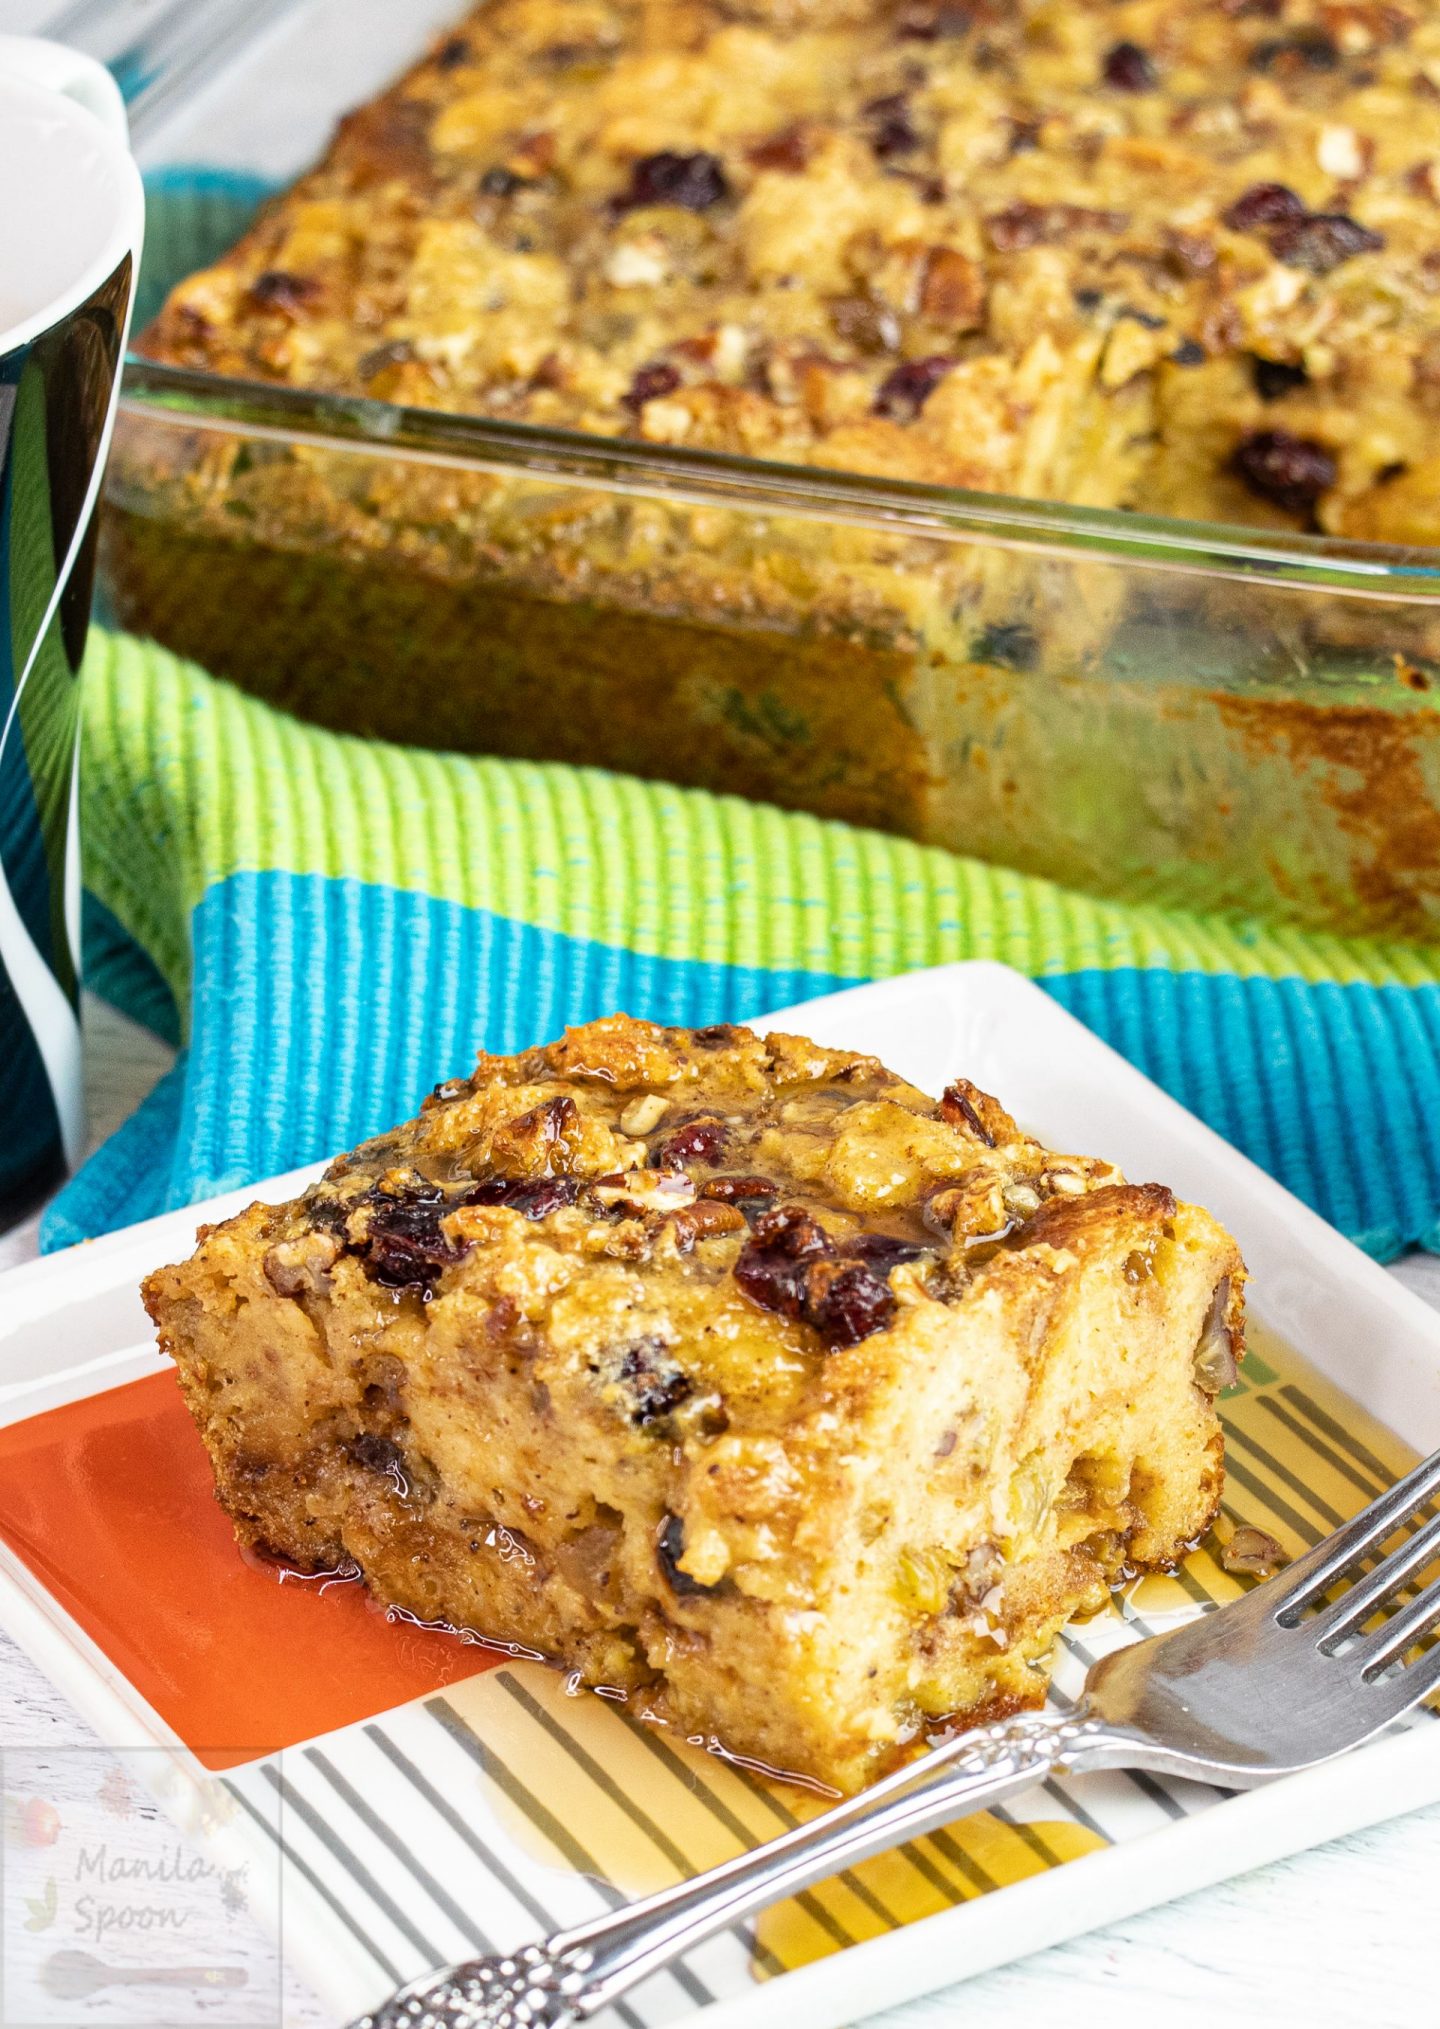 How to make Panettone Bread Pudding